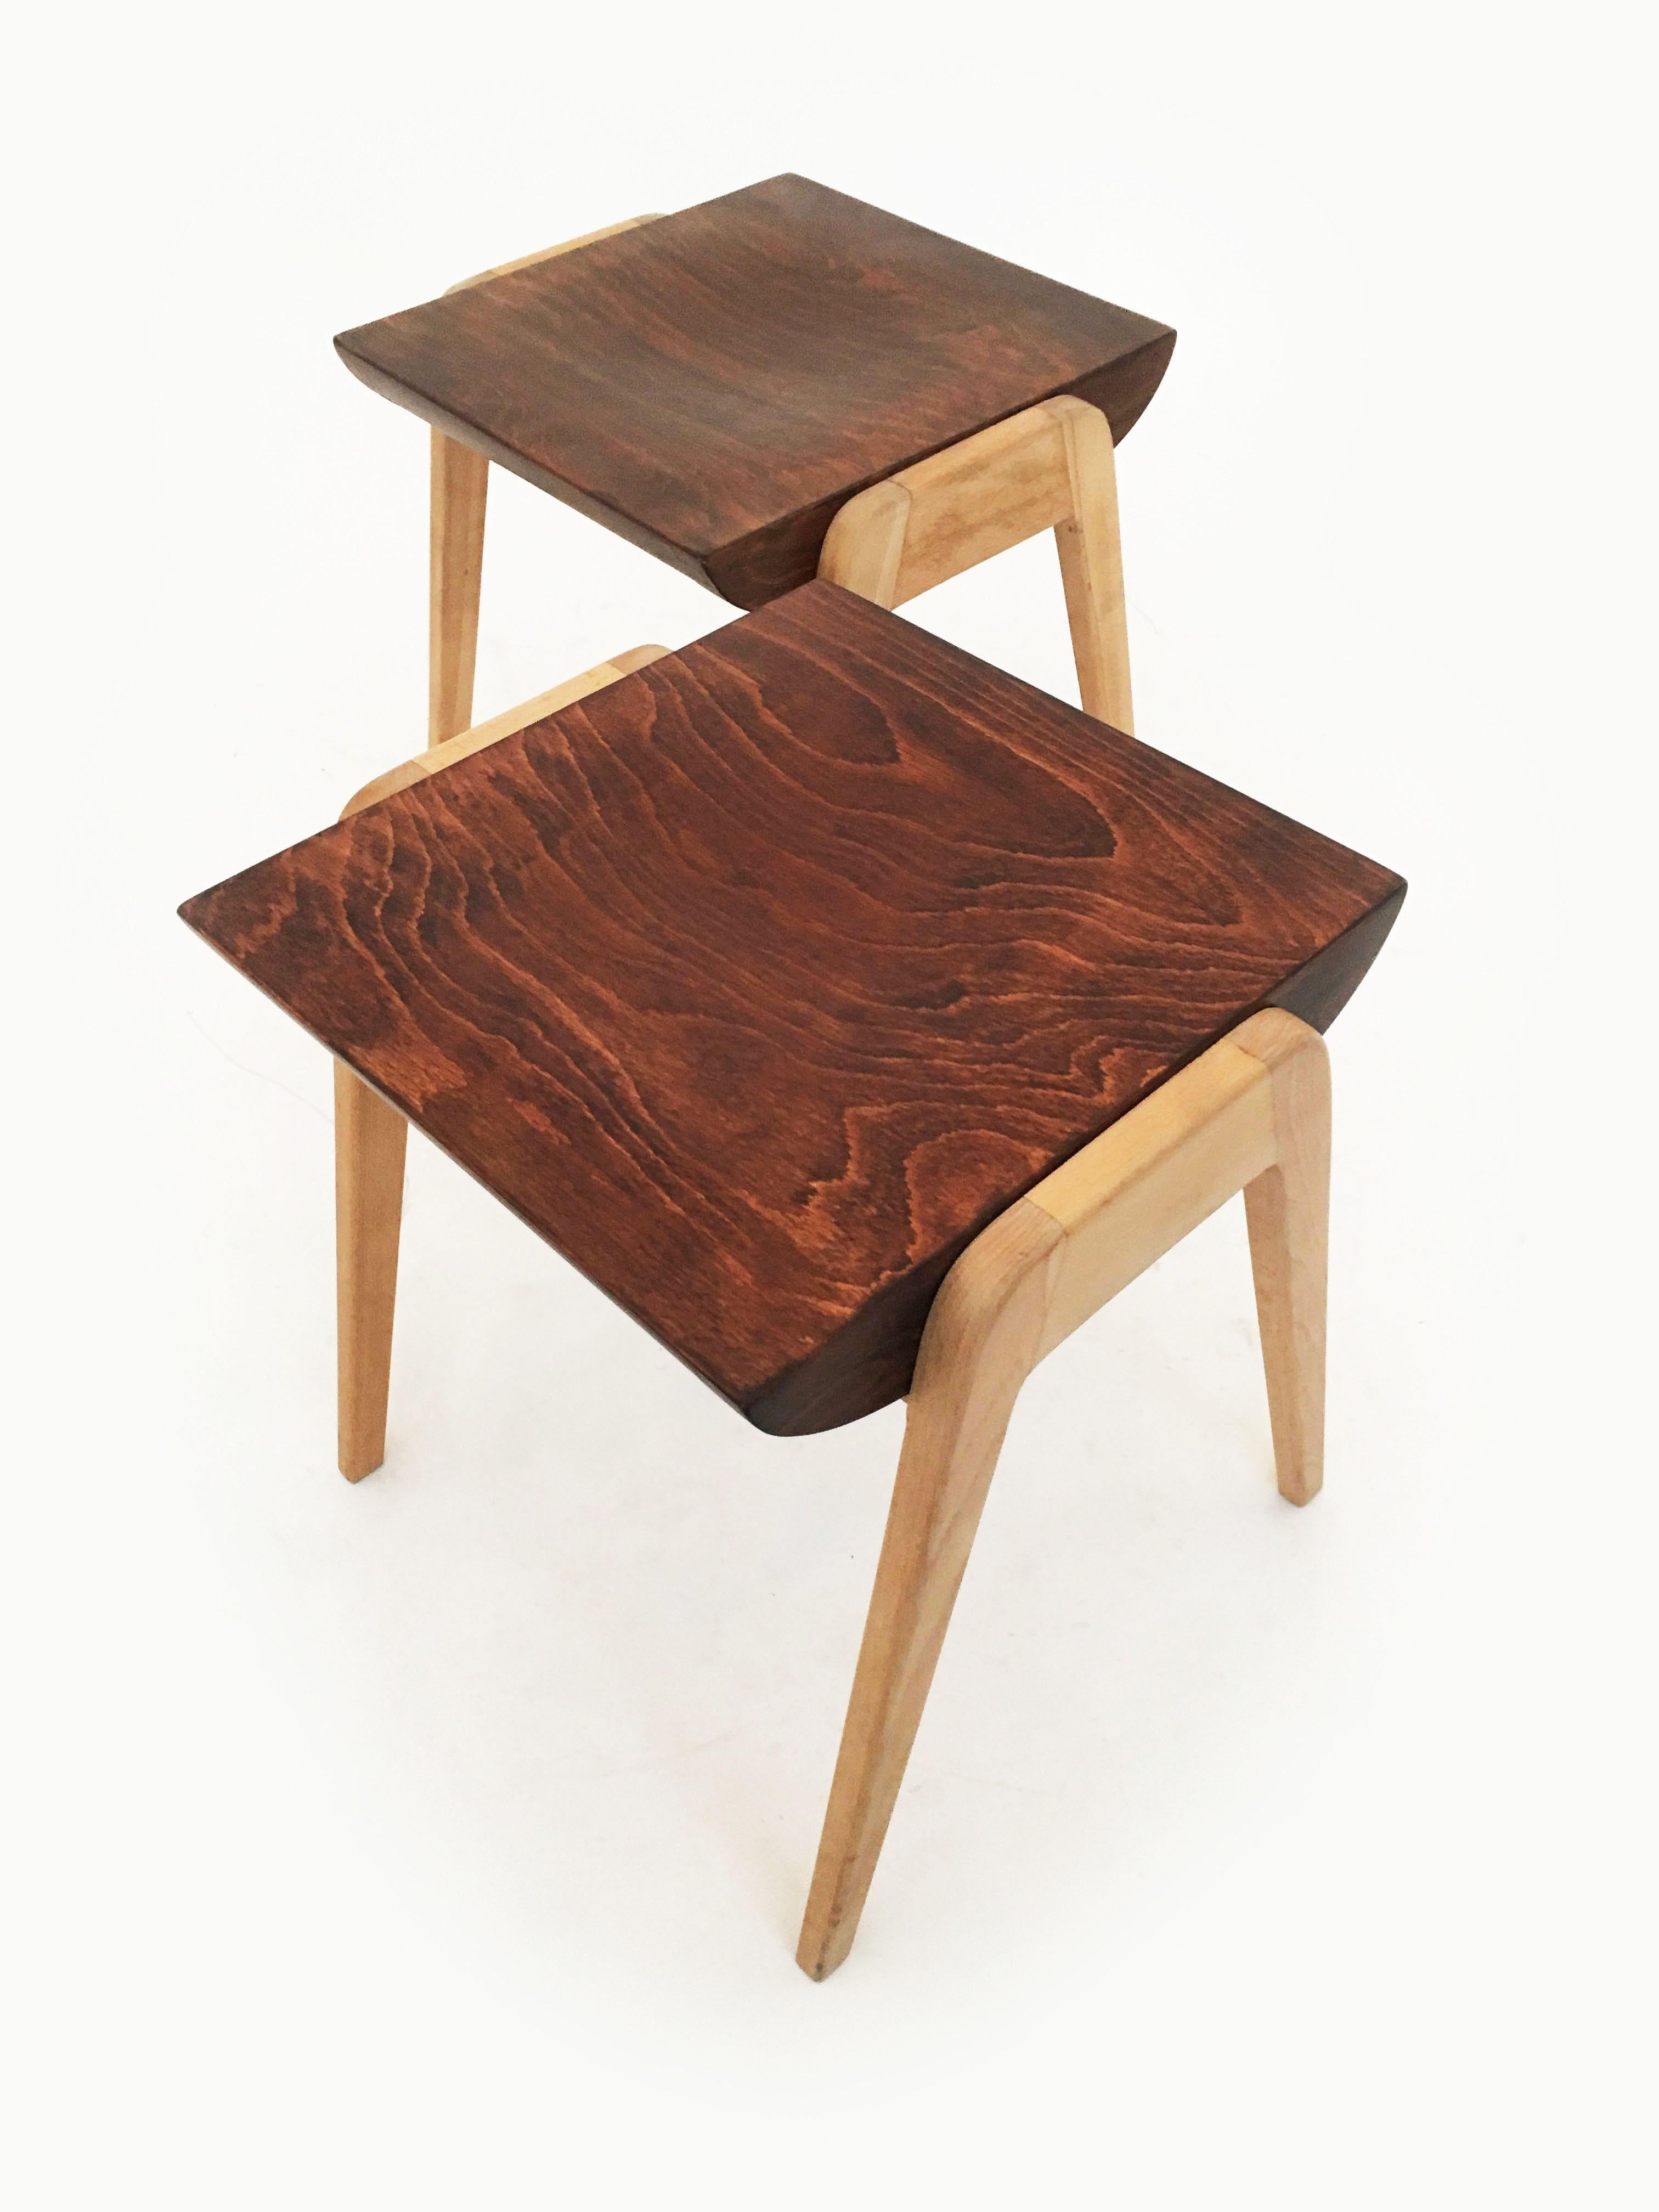 Stained Franz Schuster Stacking Stools Pair, Austria, 1950s For Sale